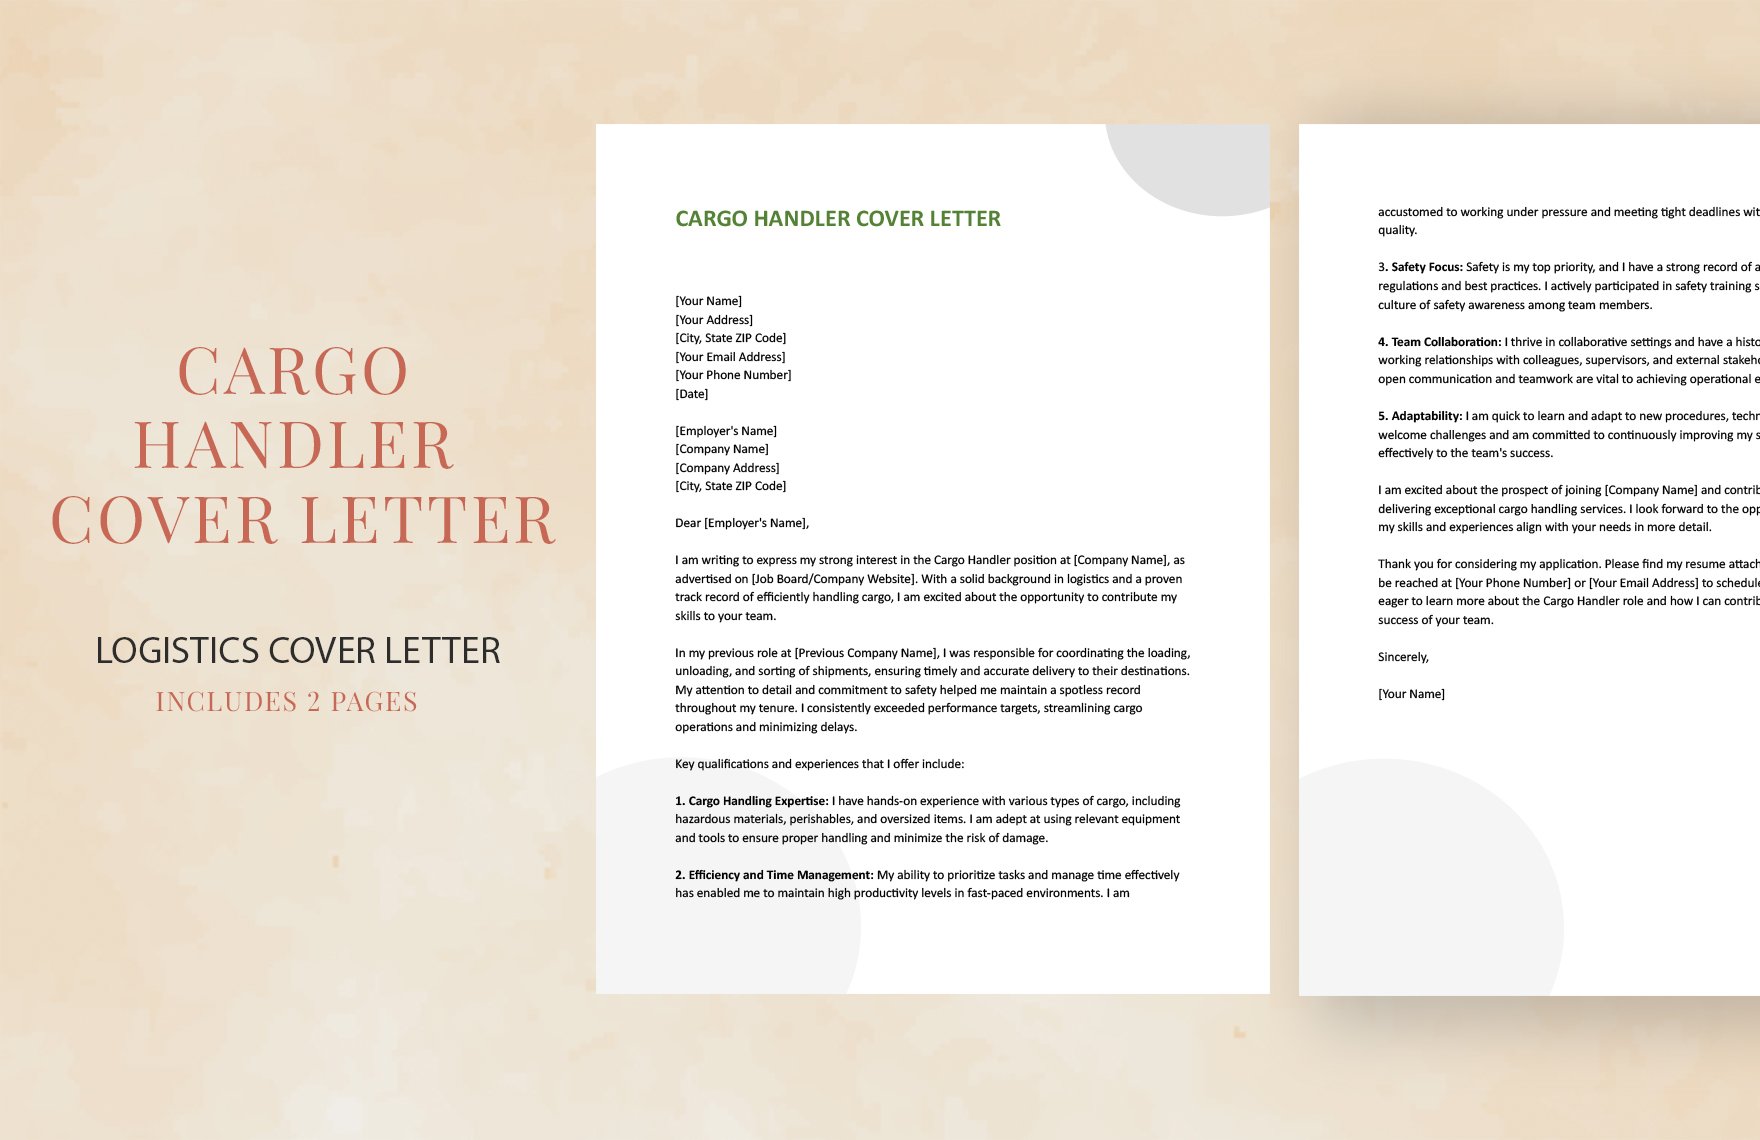 Cargo Handler Cover Letter in Word, Google Docs, Apple Pages